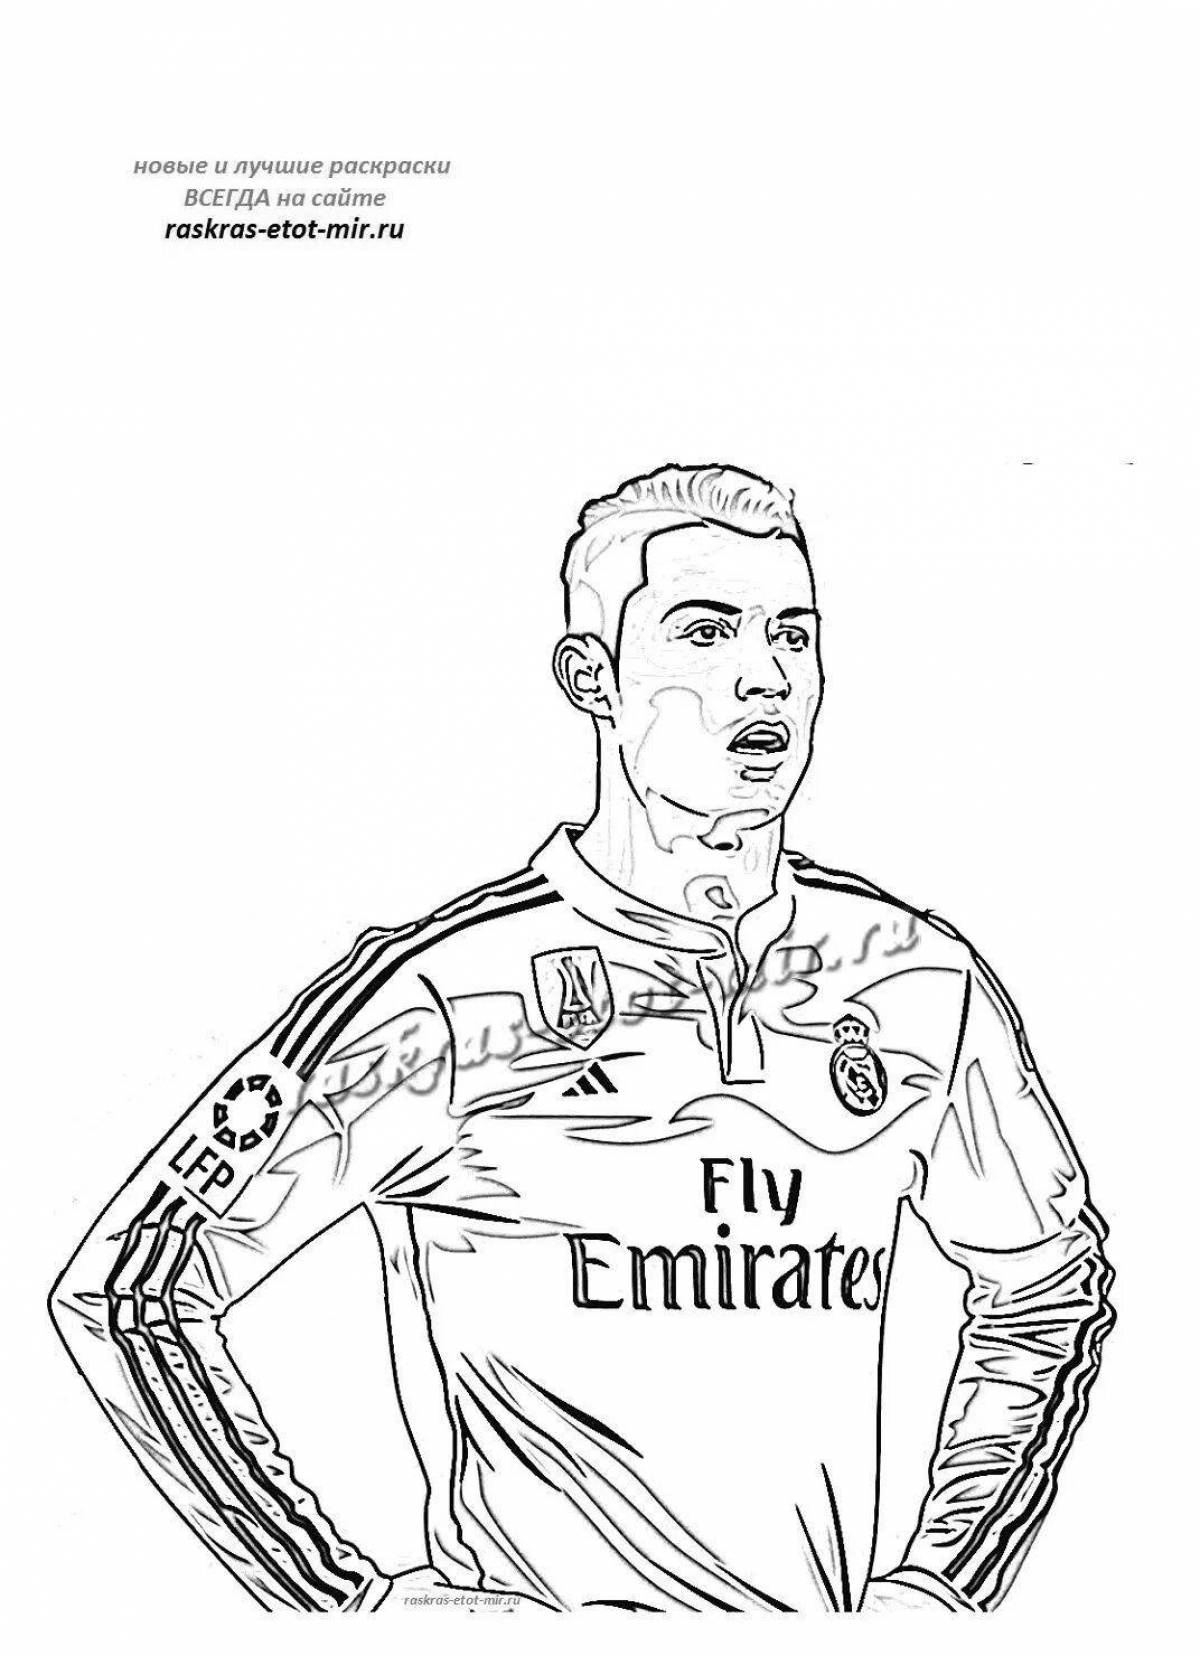 Colorful ronaldo soccer player coloring page